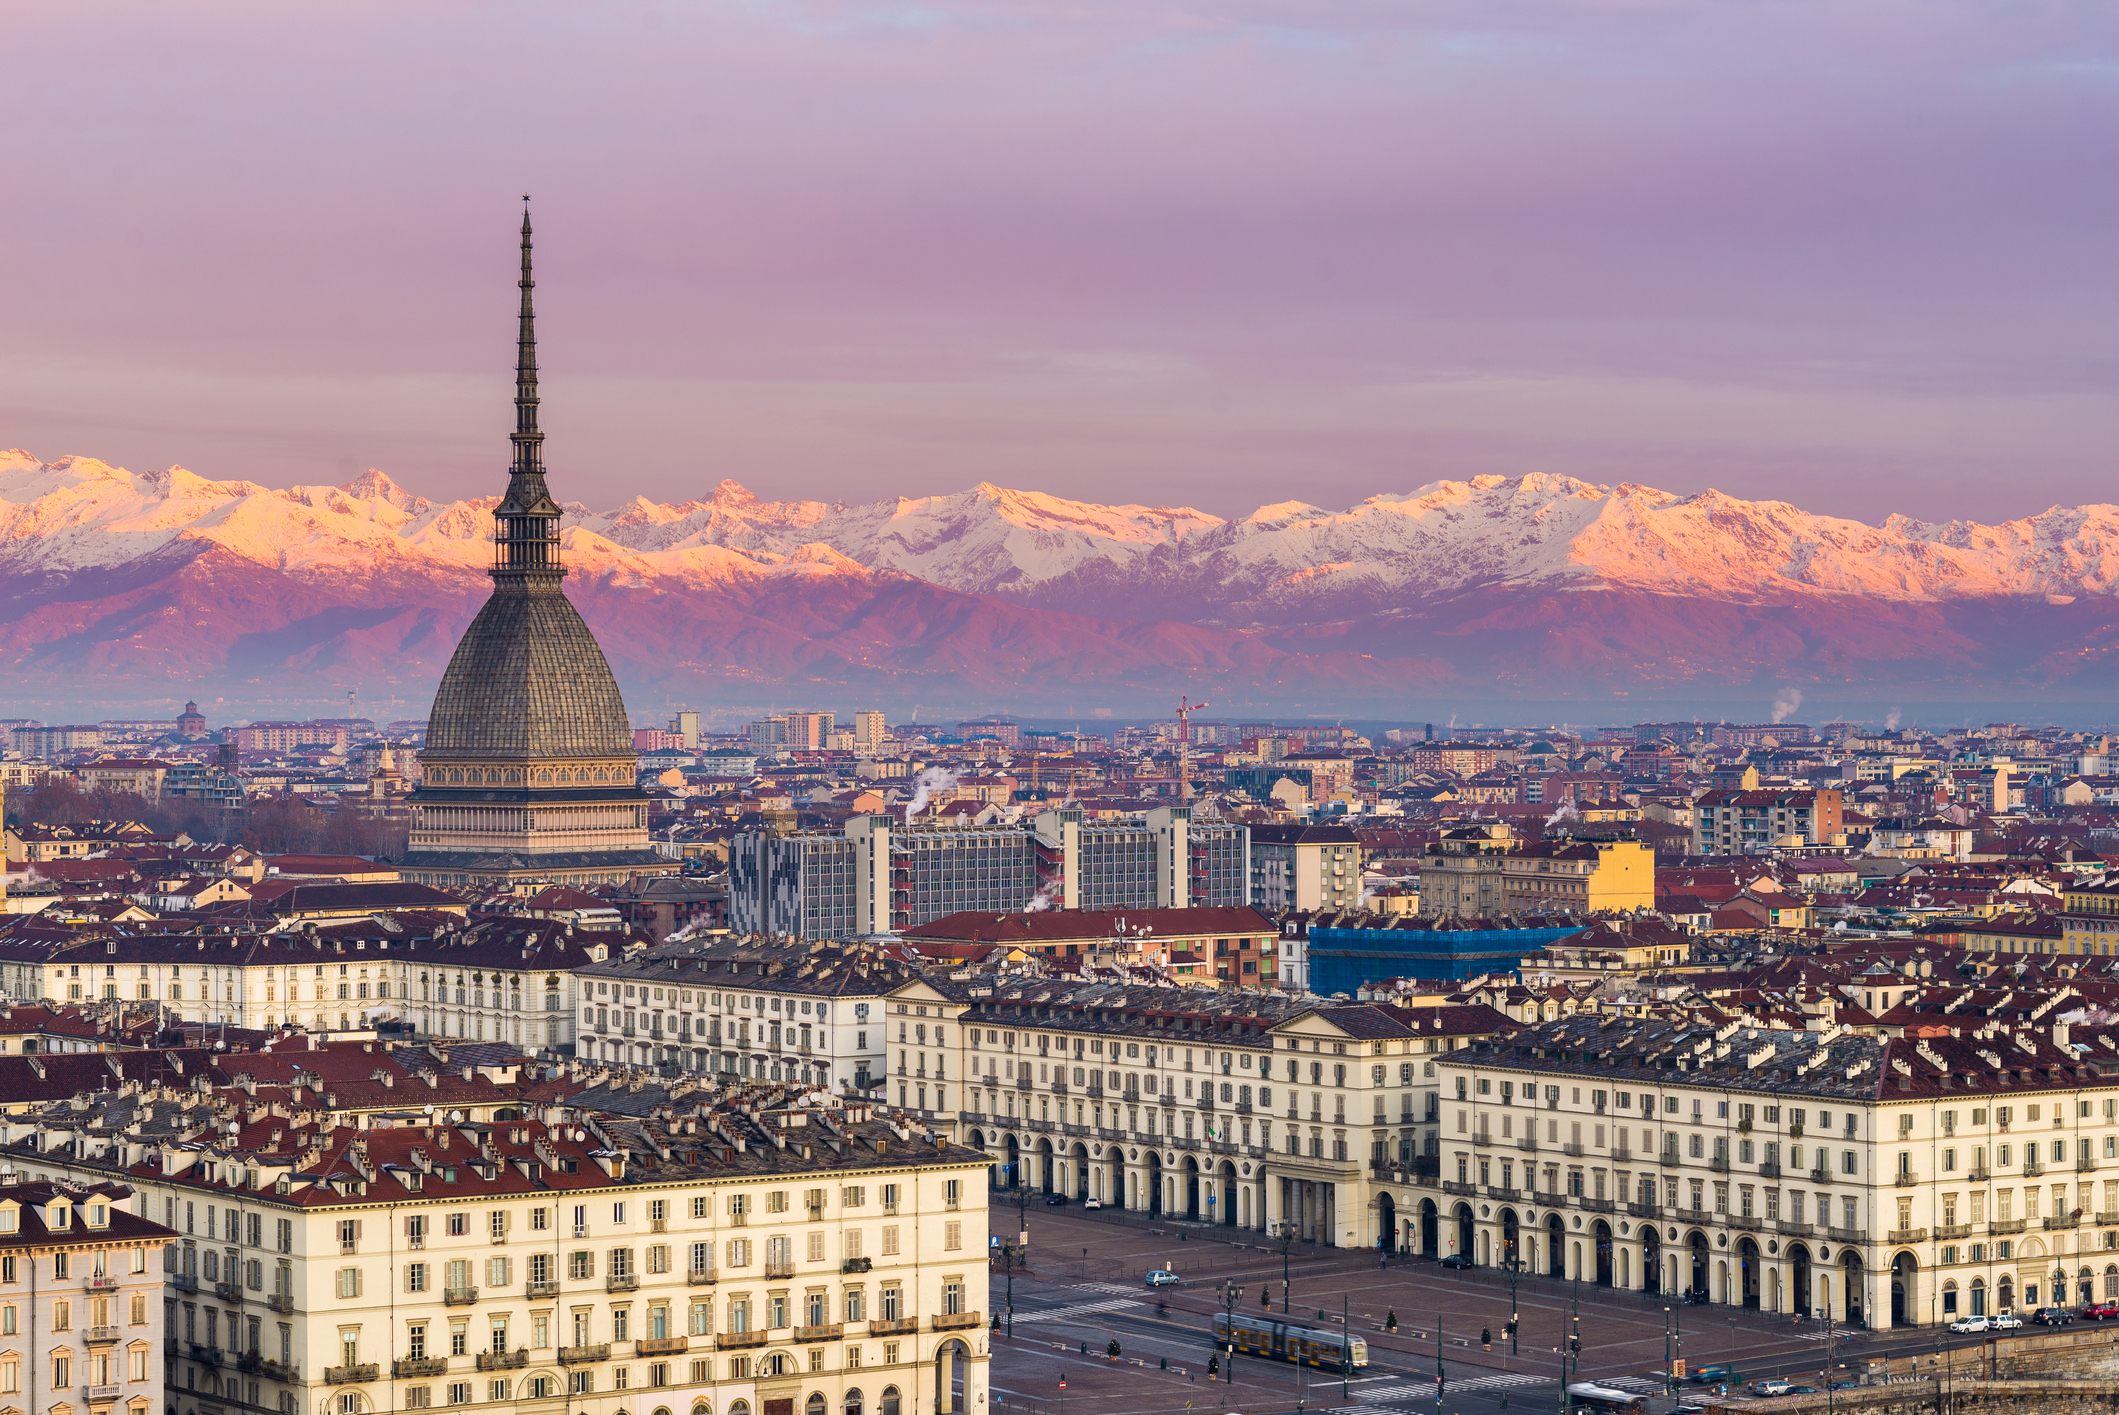 Torino (Turin, Italy): cityscape at sunrise with details of the Mole Antonelliana towering over the city and the snowcapped Alps in the background.